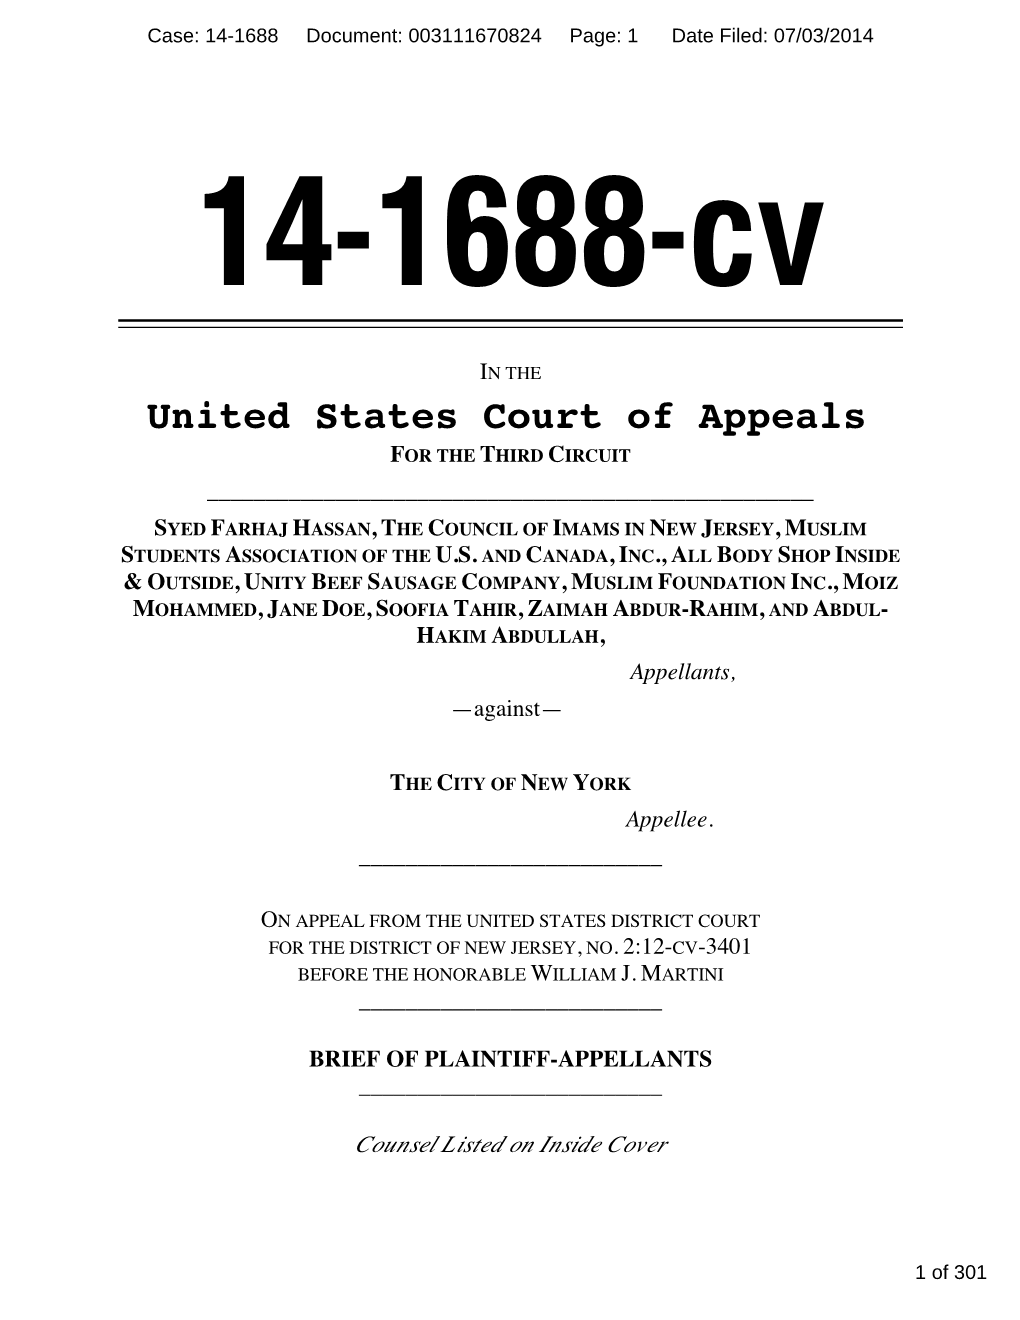 United States Court of Appeals for the THIRD CIRCUIT ______SYED FARHAJ HASSAN, the COUNCIL of IMAMS in NEW JERSEY, MUSLIM STUDENTS ASSOCIATION of the U.S